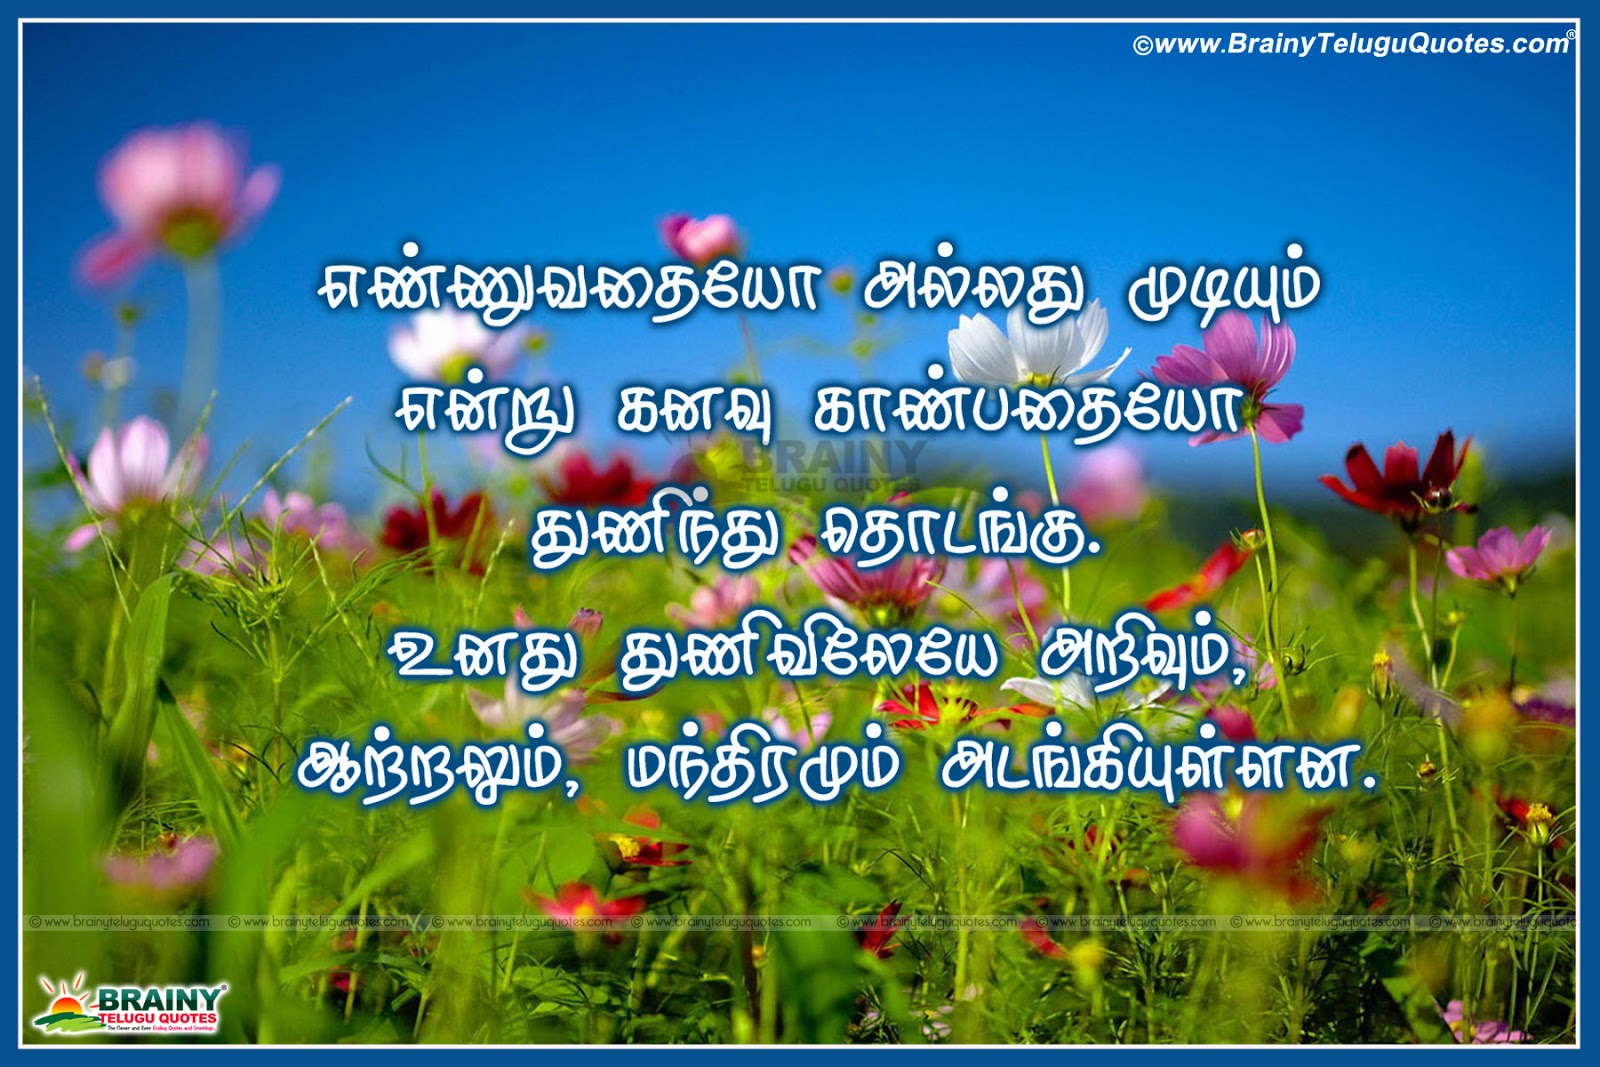 Motivational quotes in Tamil language with HD Wallpapers